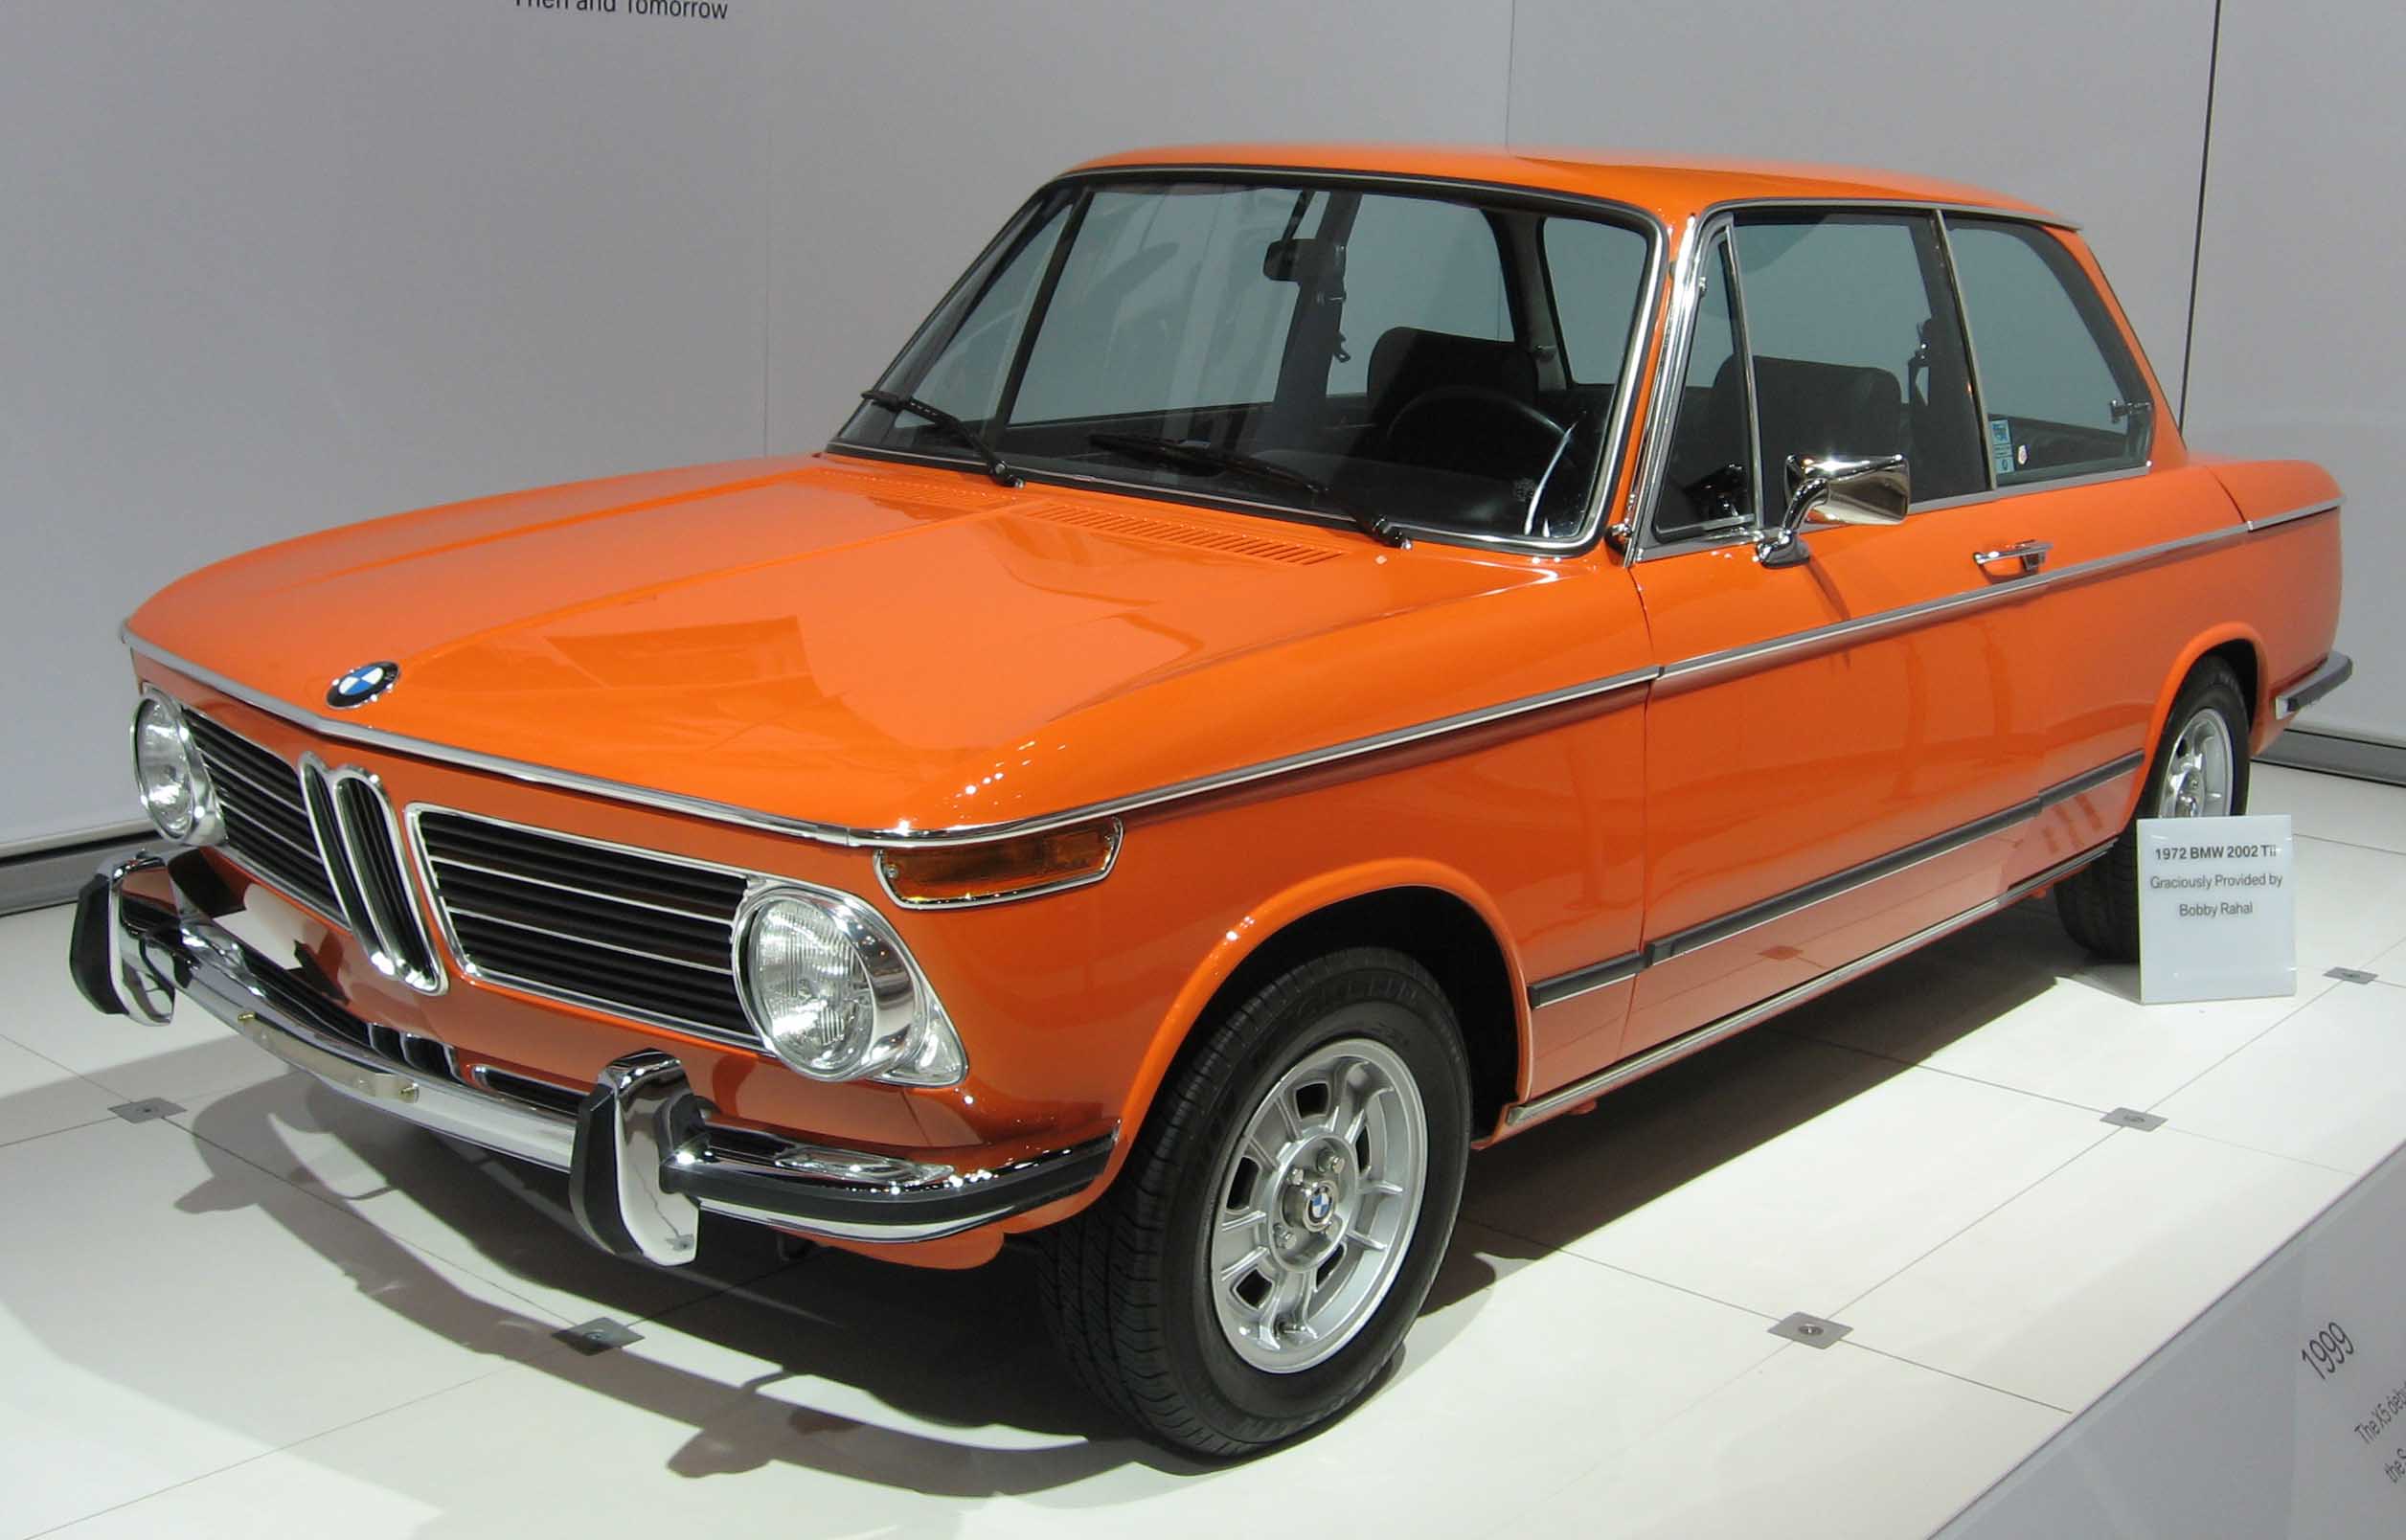 When the past becomes actual today with BMW 2002 1502 model #7